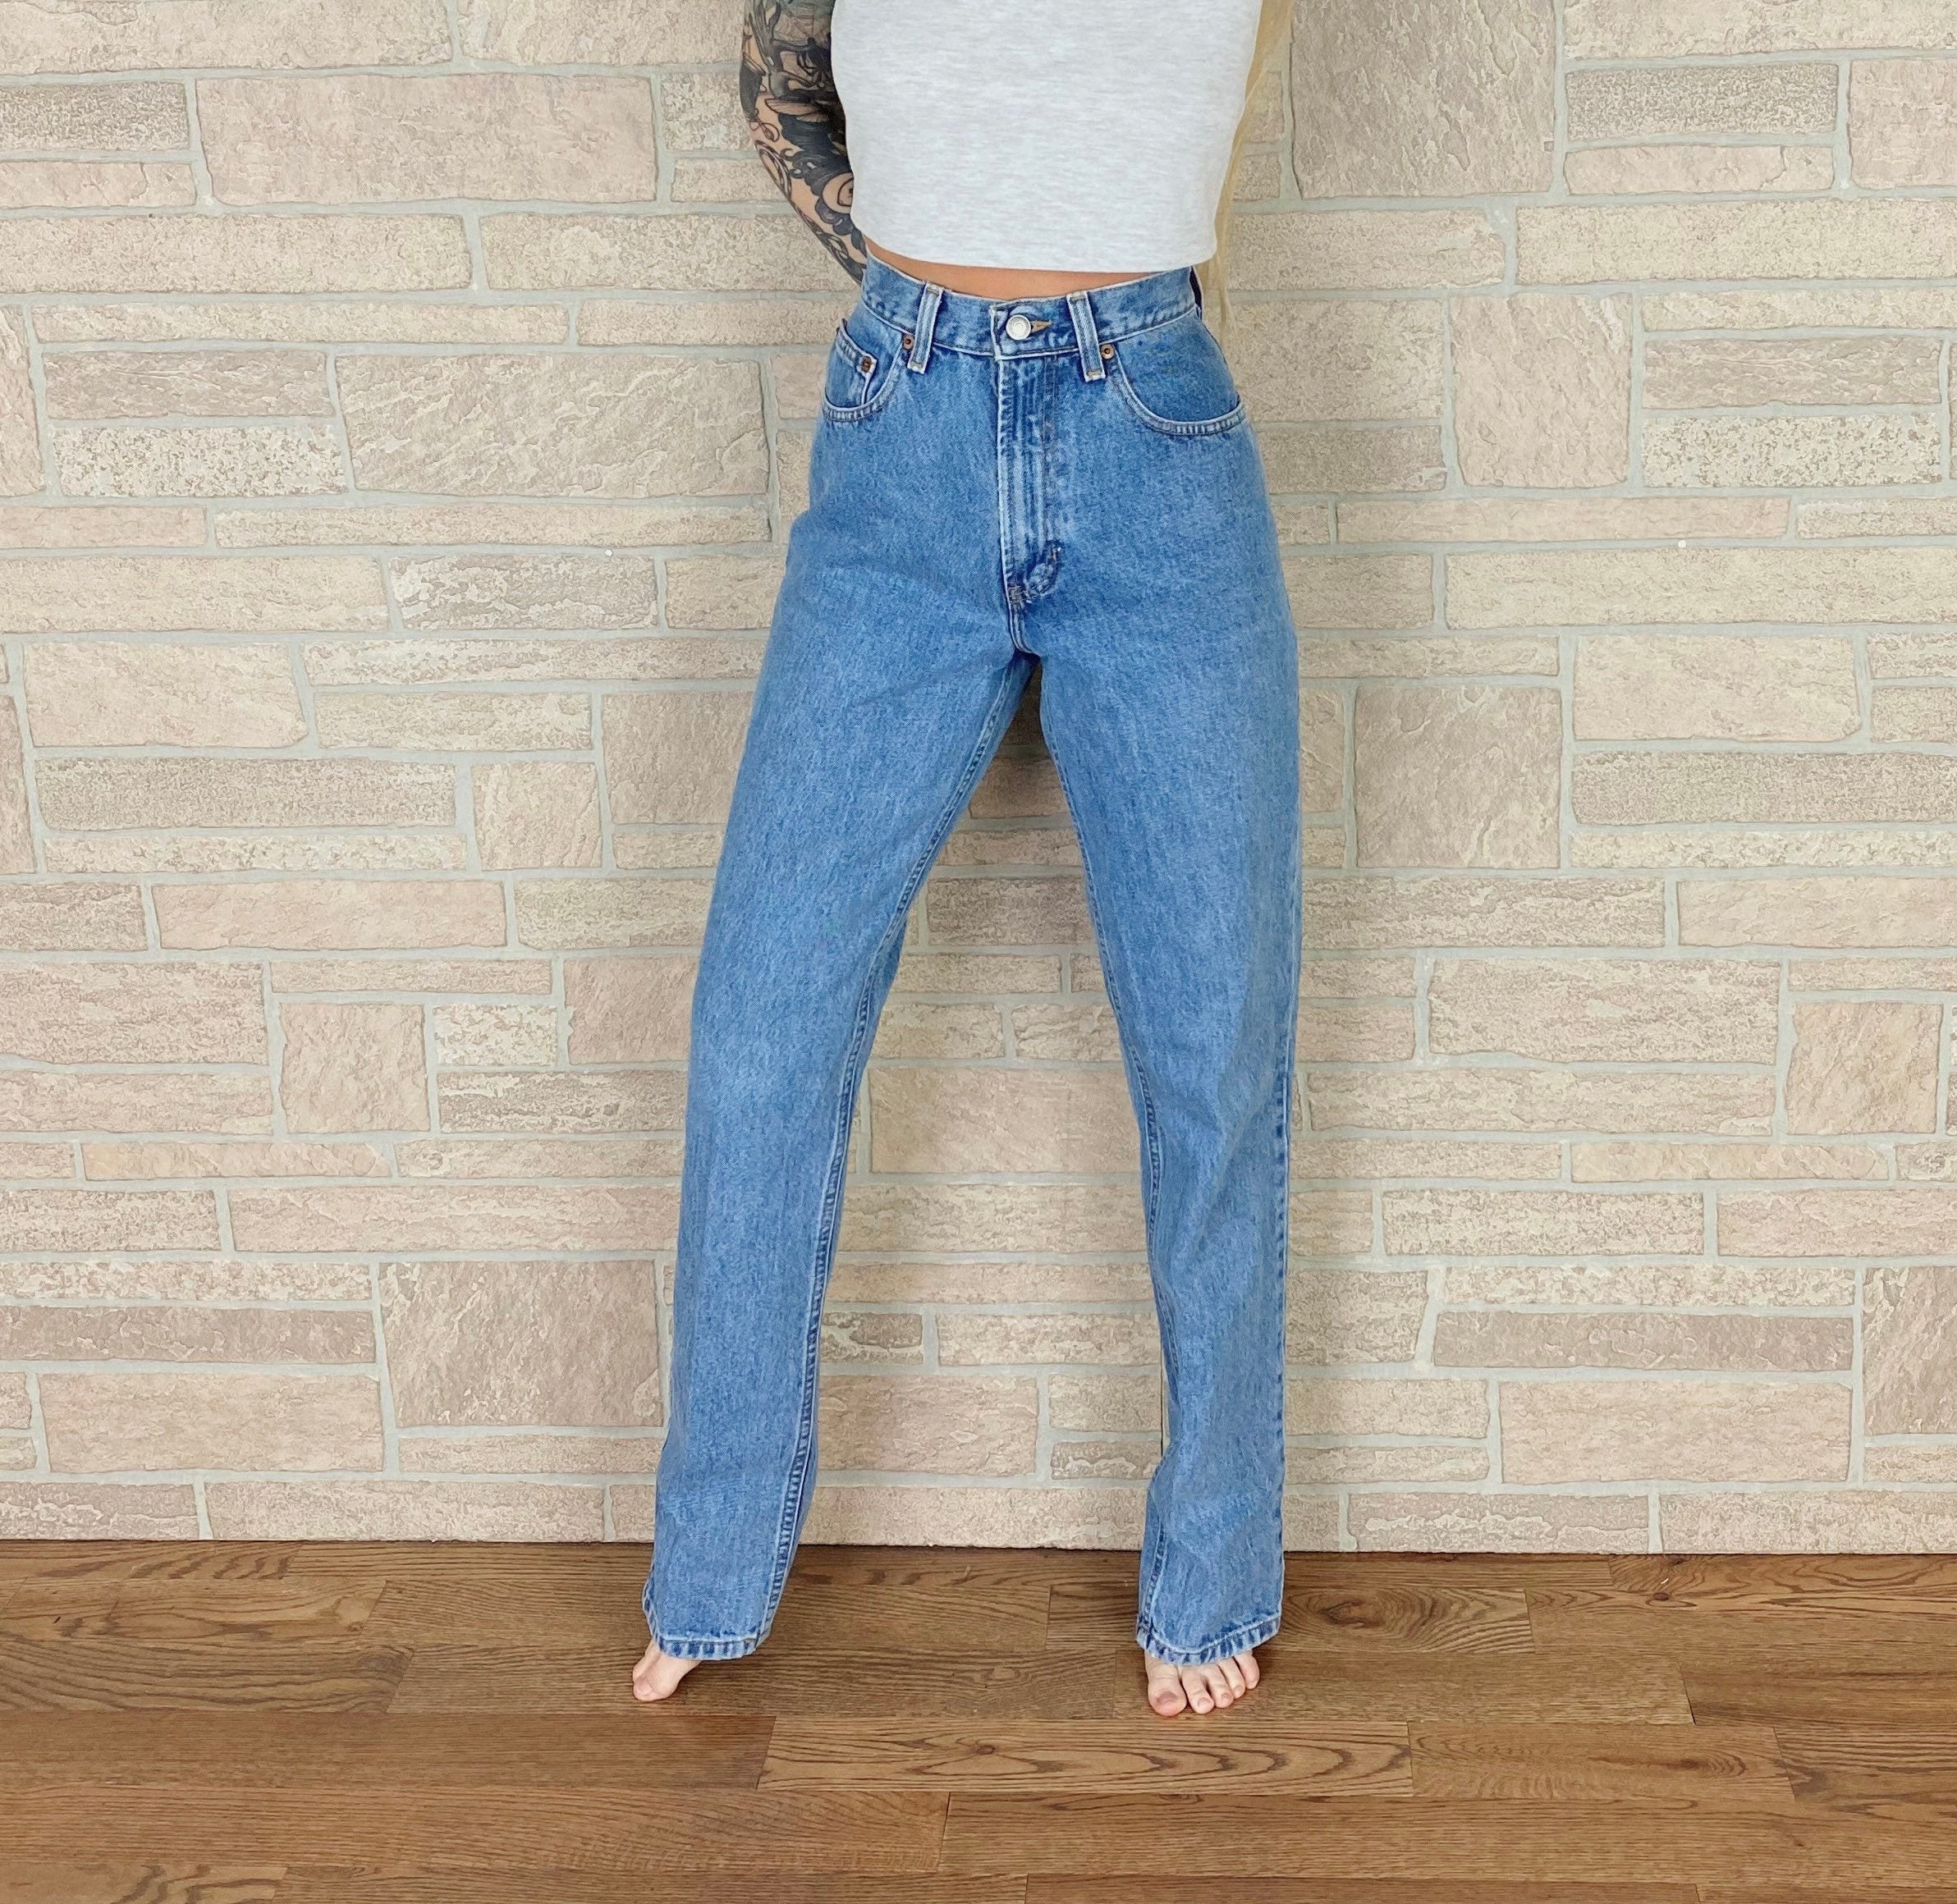 90's Gap High Waisted Vintage Jeans / Size 27